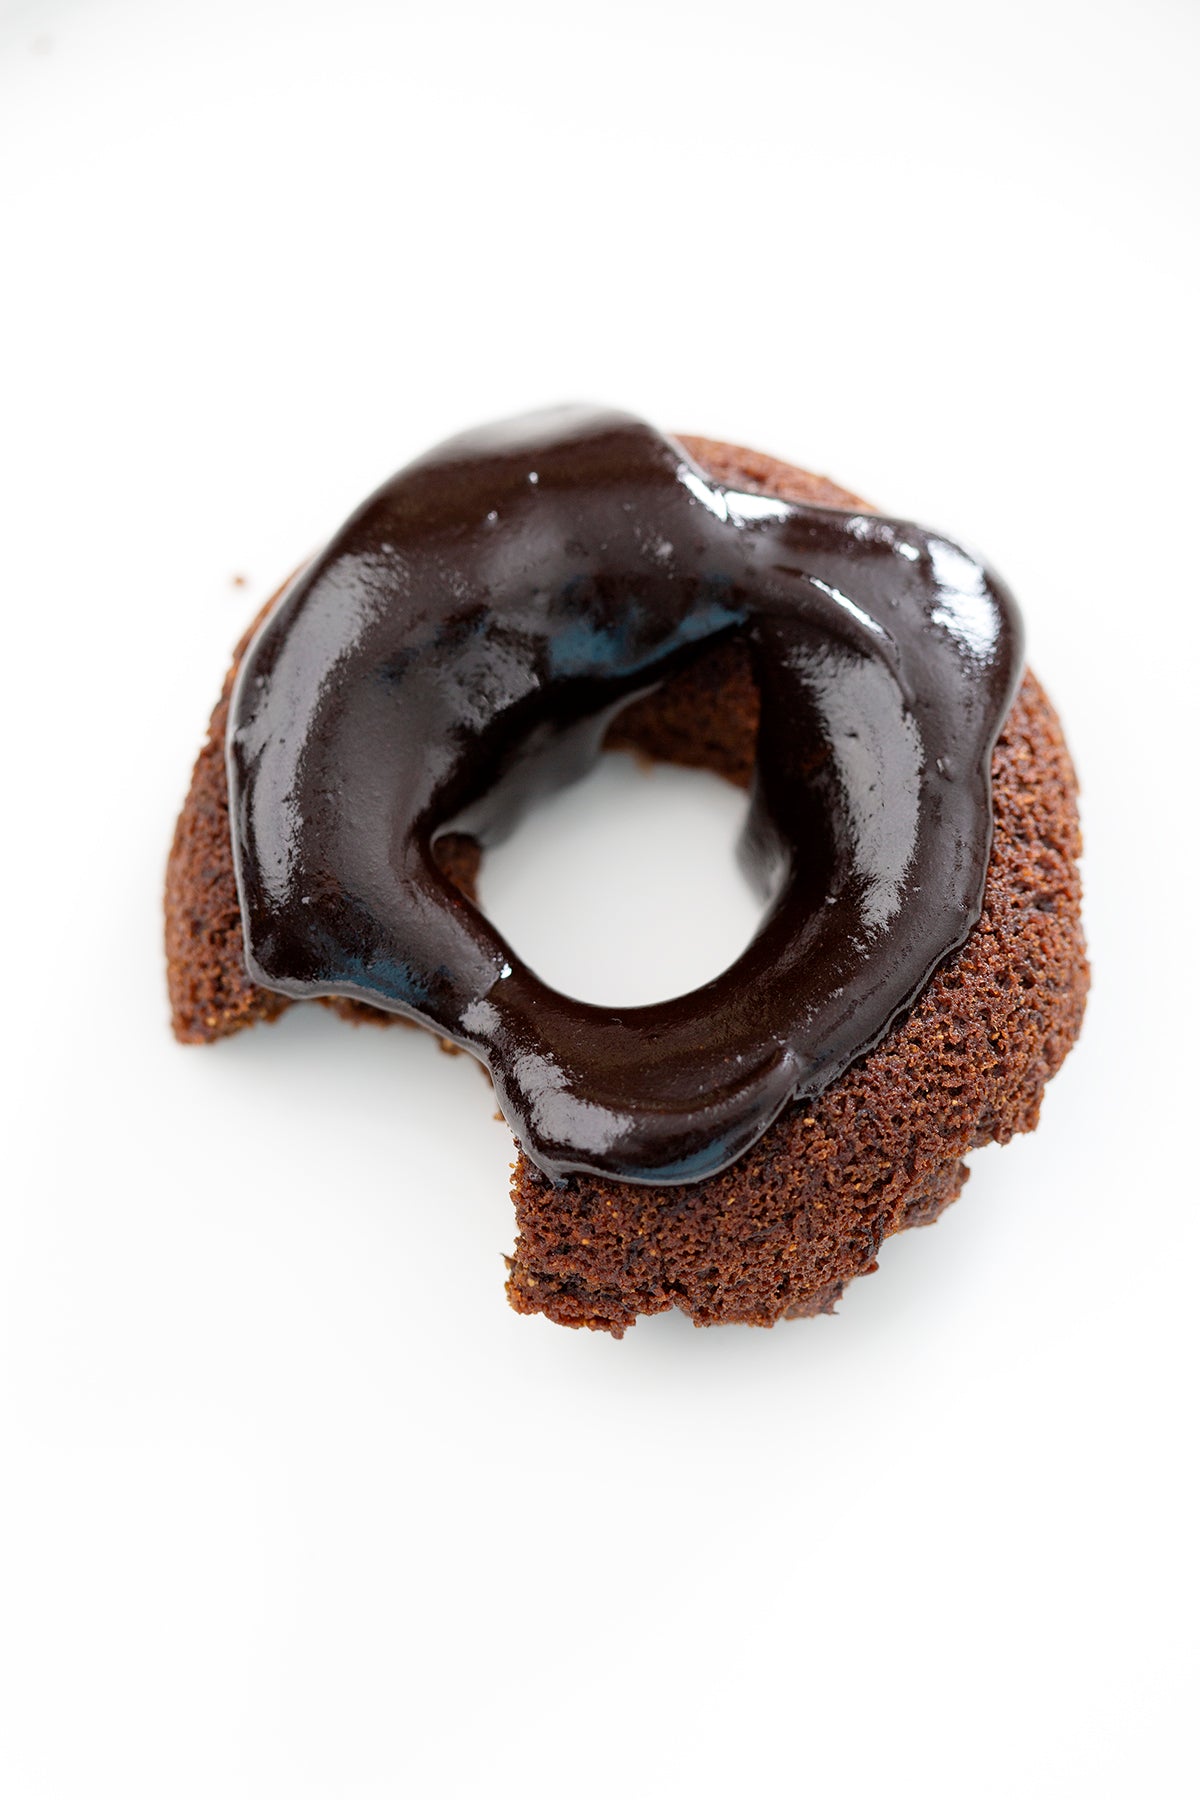 aip chocolate donut with bite missing